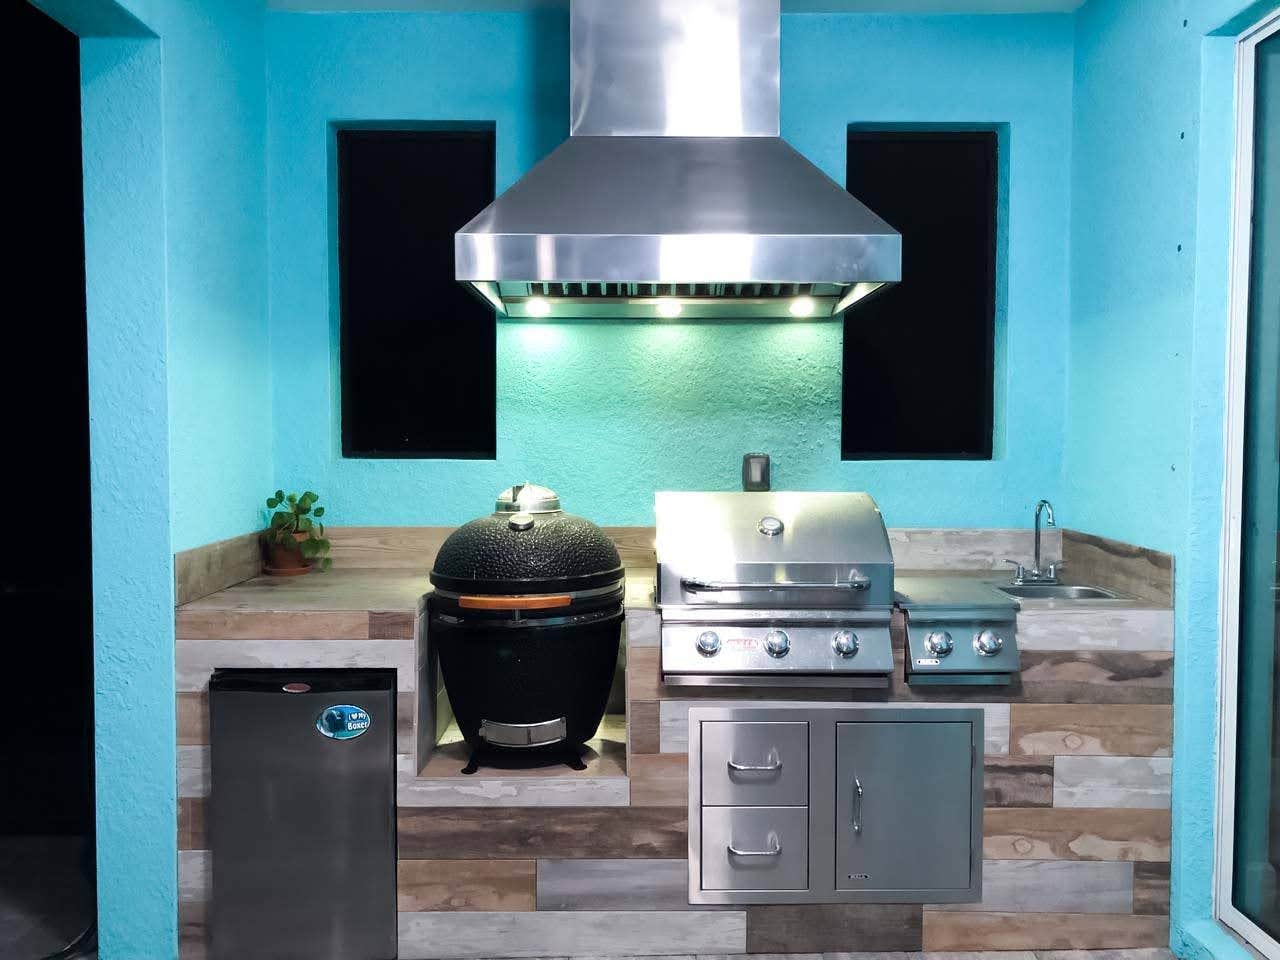 Contemporary outdoor kitchen featuring a Proline range hood, stainless steel grill, and ceramic smoker against a vibrant blue backdrop - prolinerangehoods.com